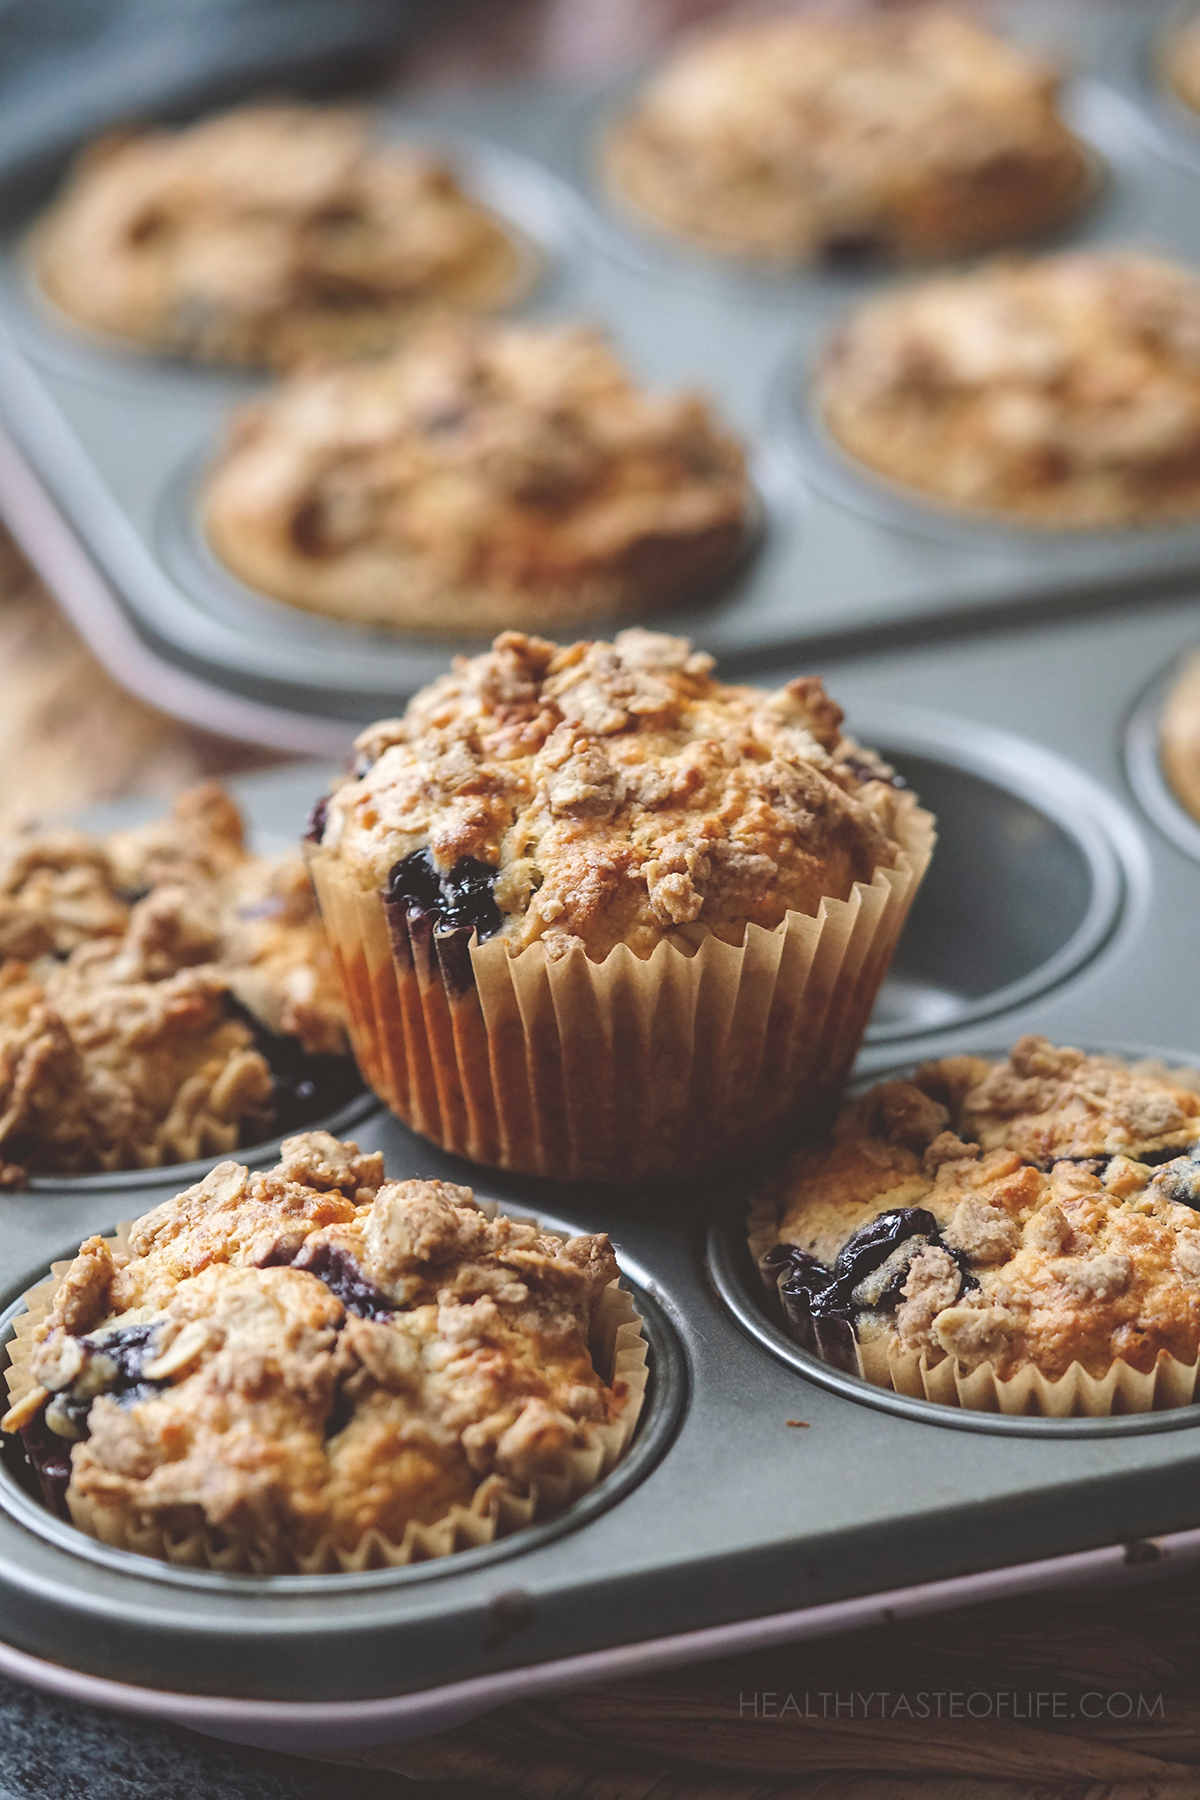 Blueberry banana oatmeal muffins in the muffin tin.